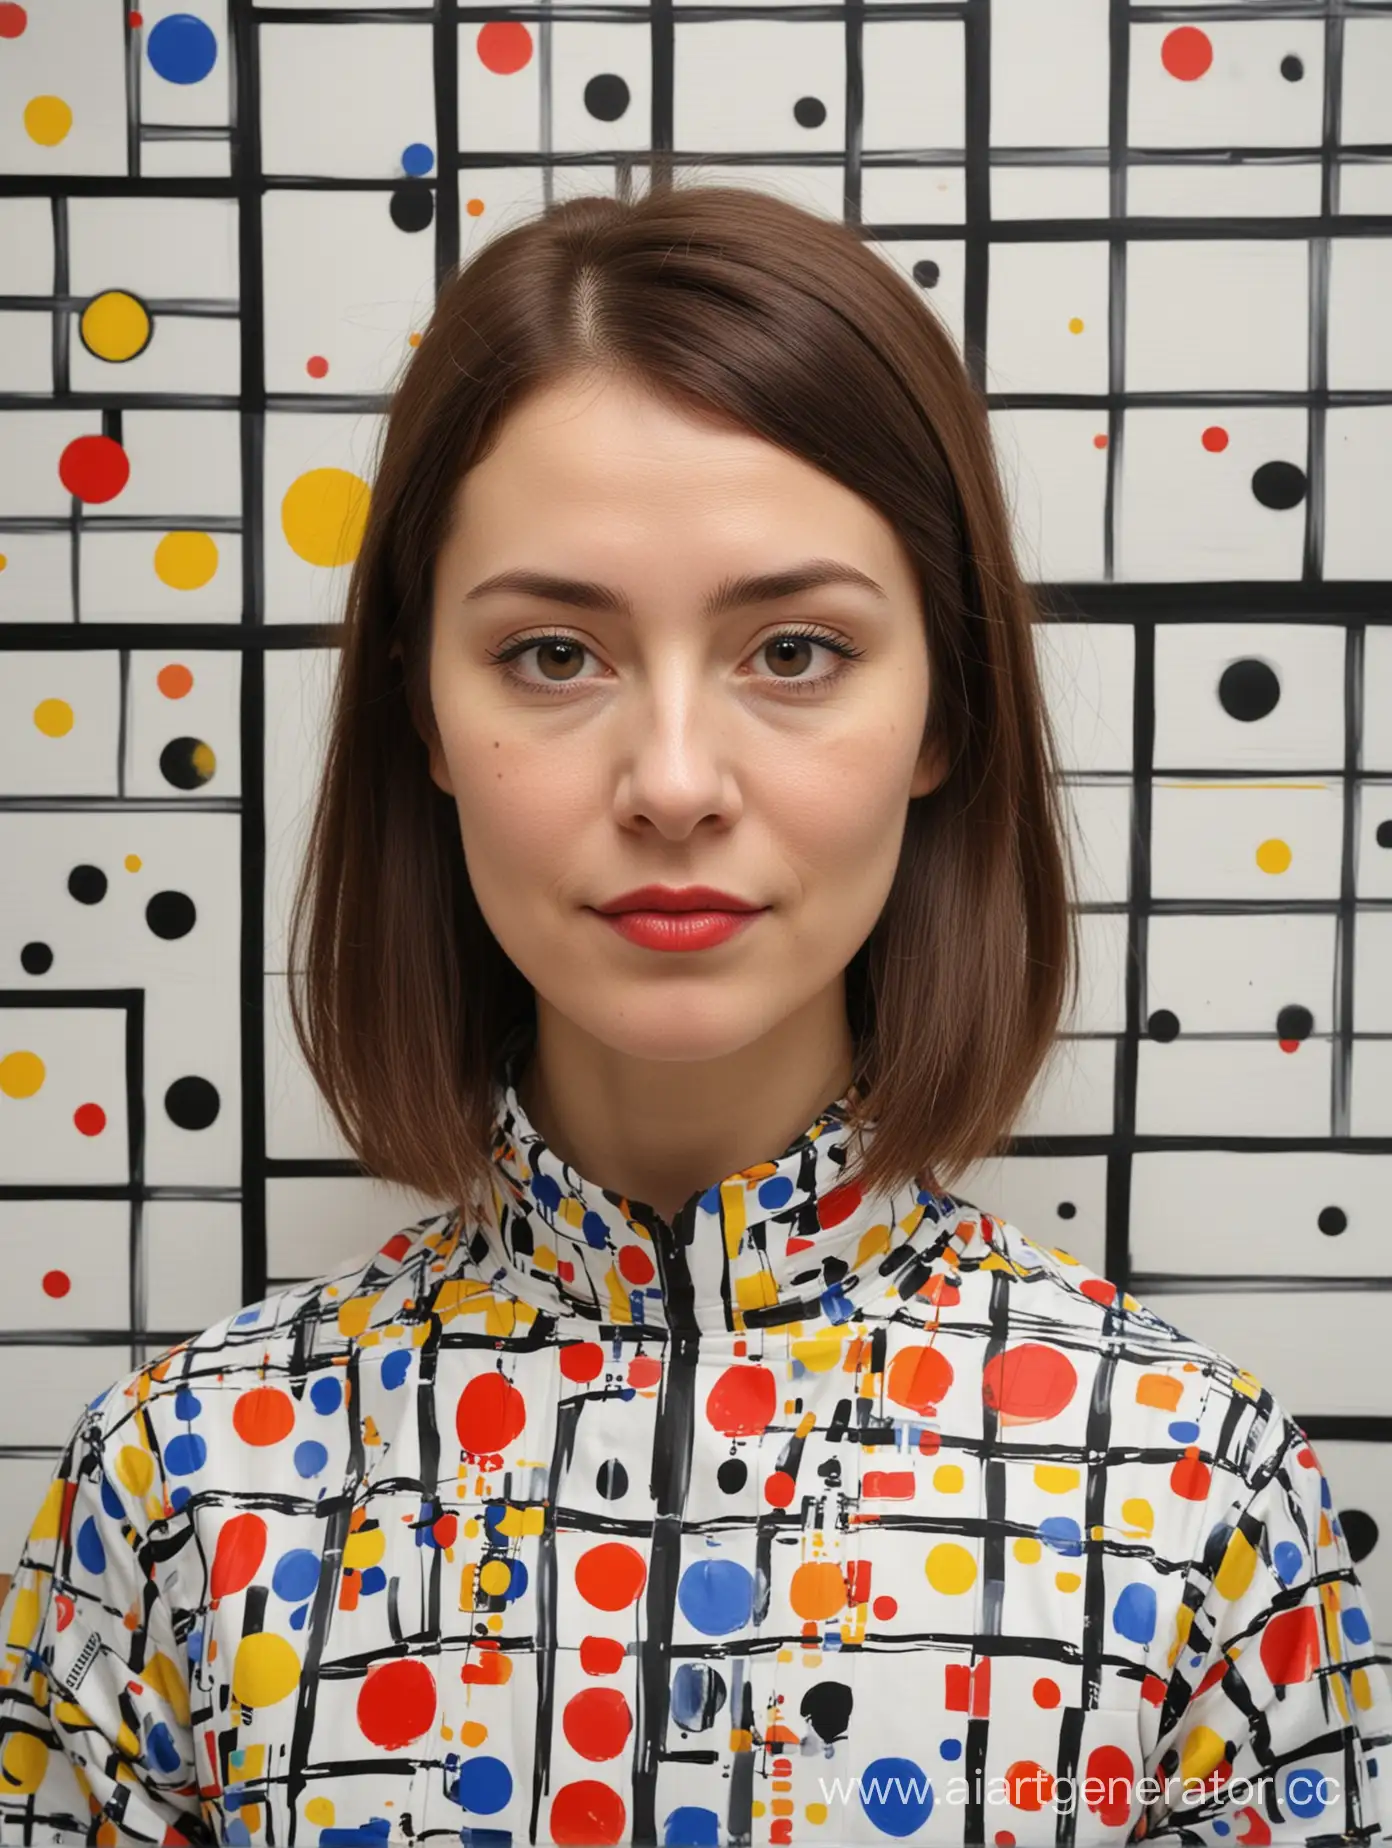 Create a painting based on the work of the artist Pete Mondrian and Yayoi Kusama. 